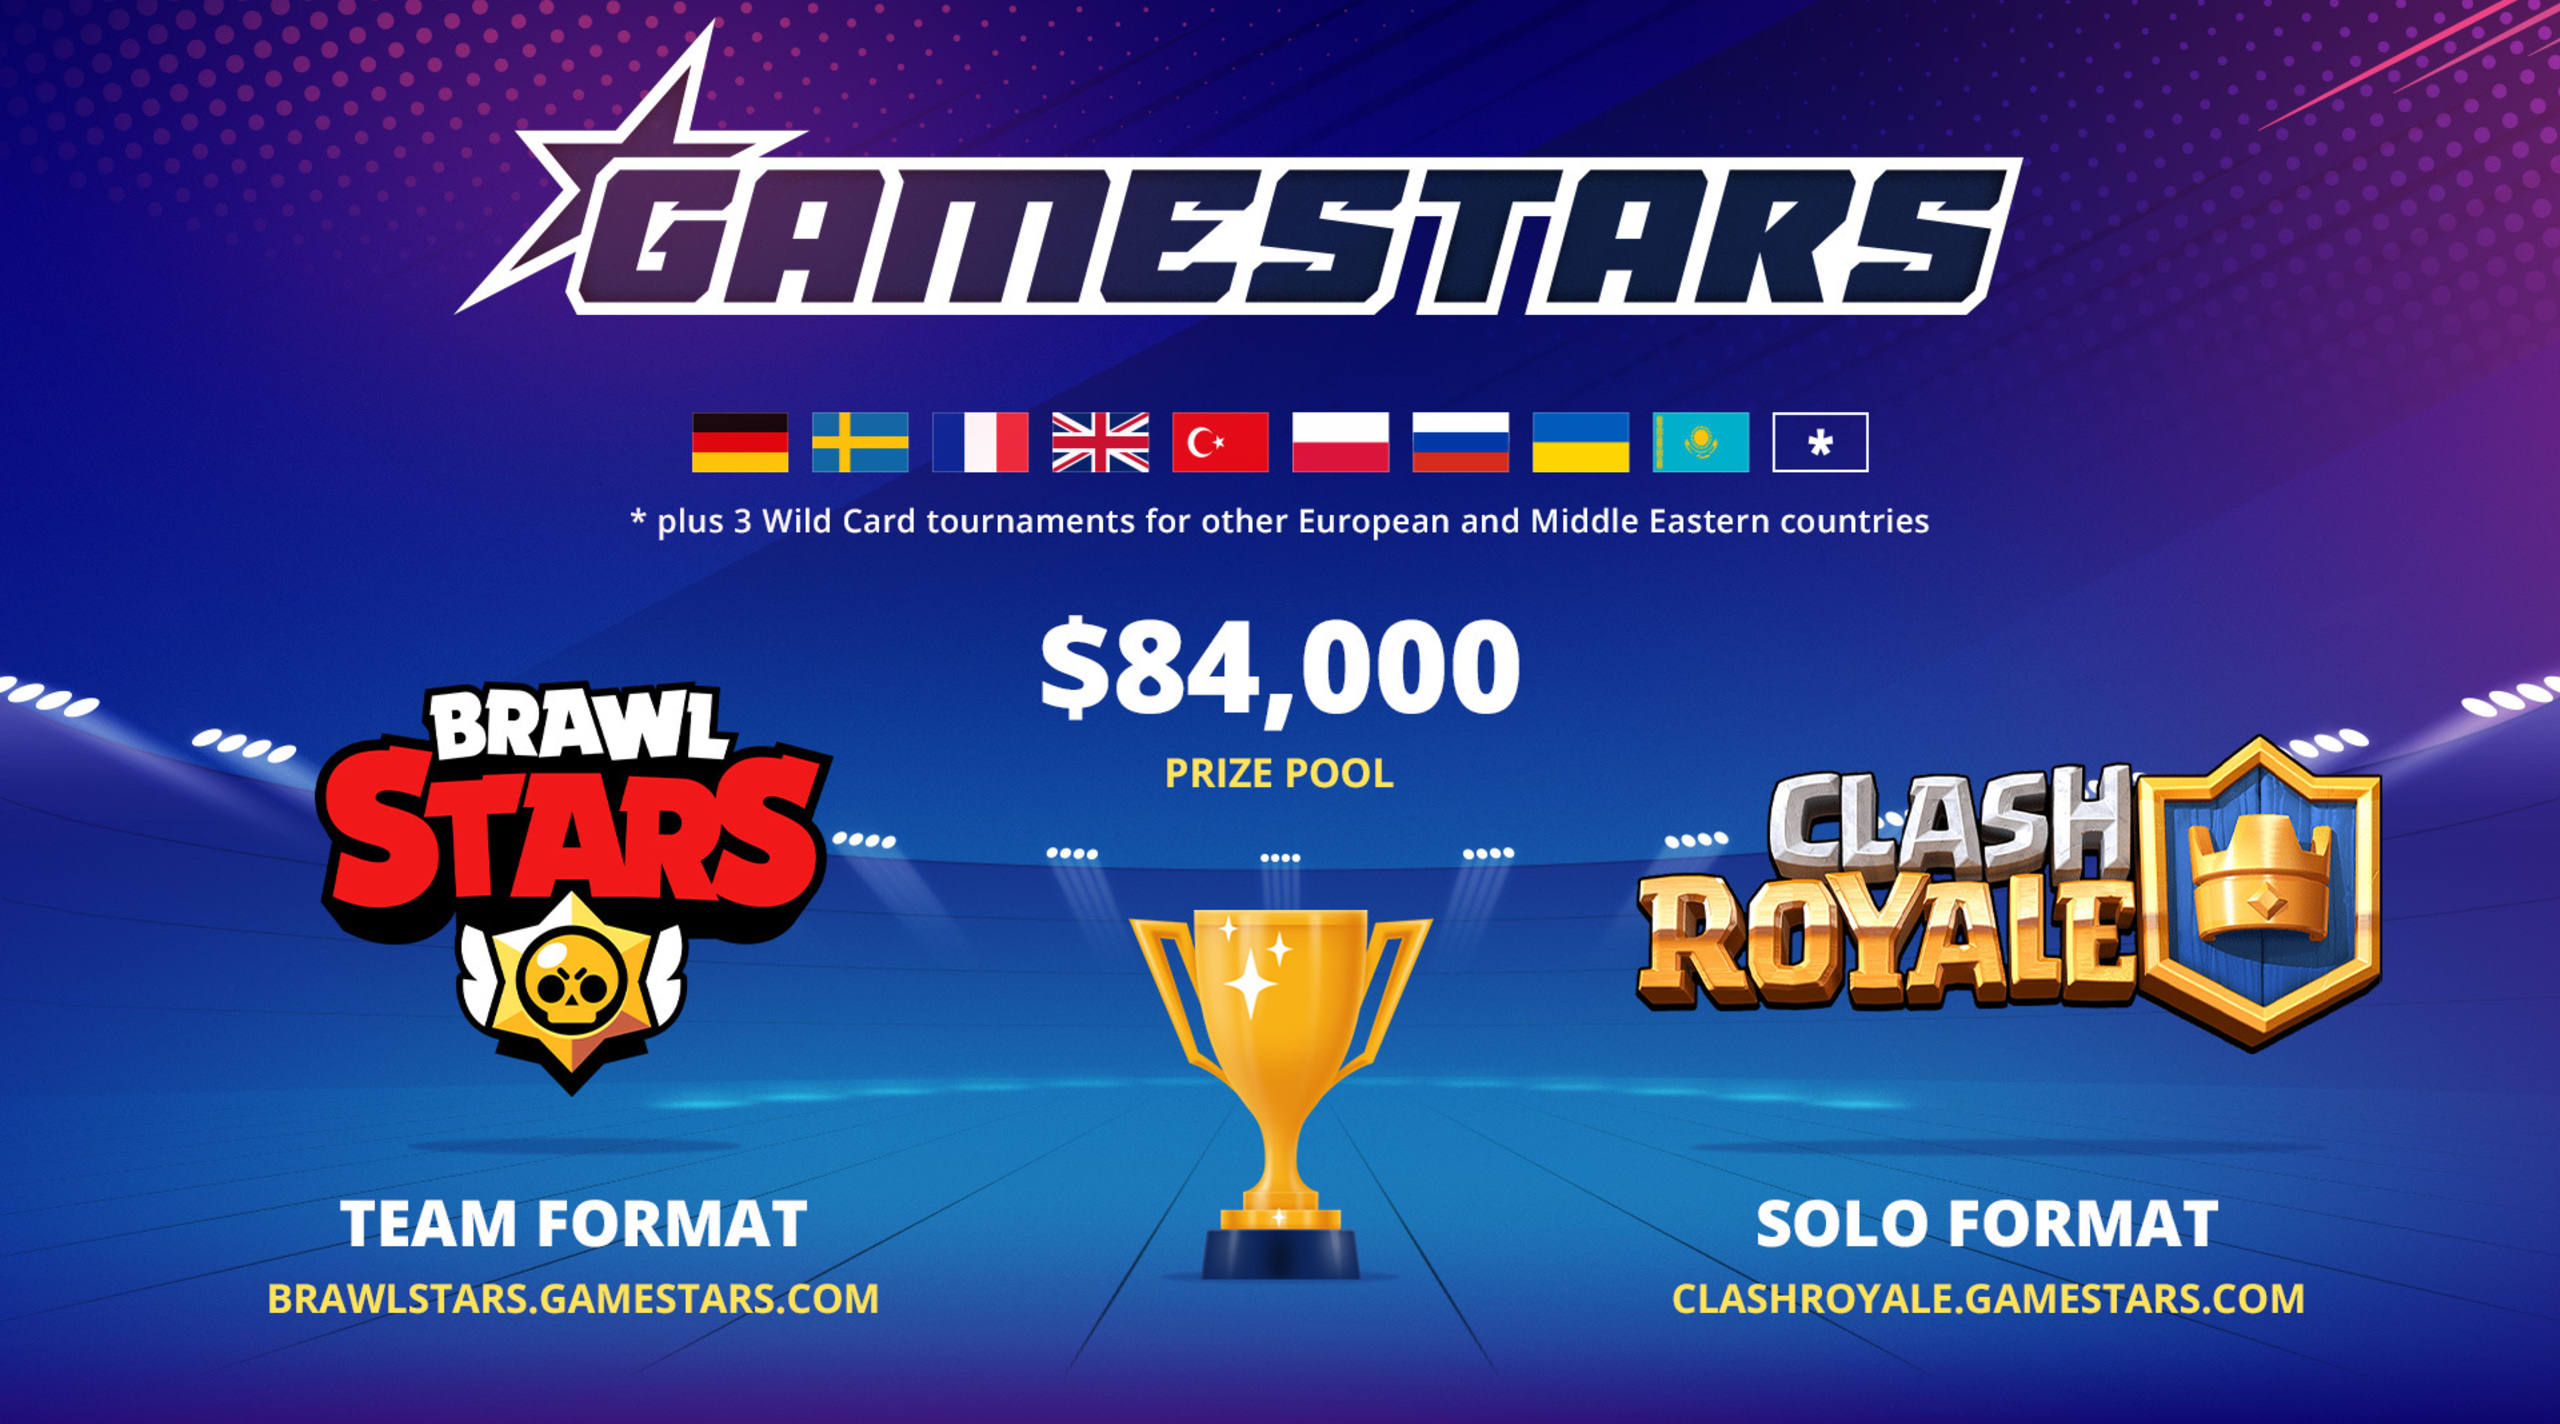 Starladder To Launch The First Season Of Gamestars League For The Brawl Stars And Clash Royale Players Starladder - brawl stars finals 2021